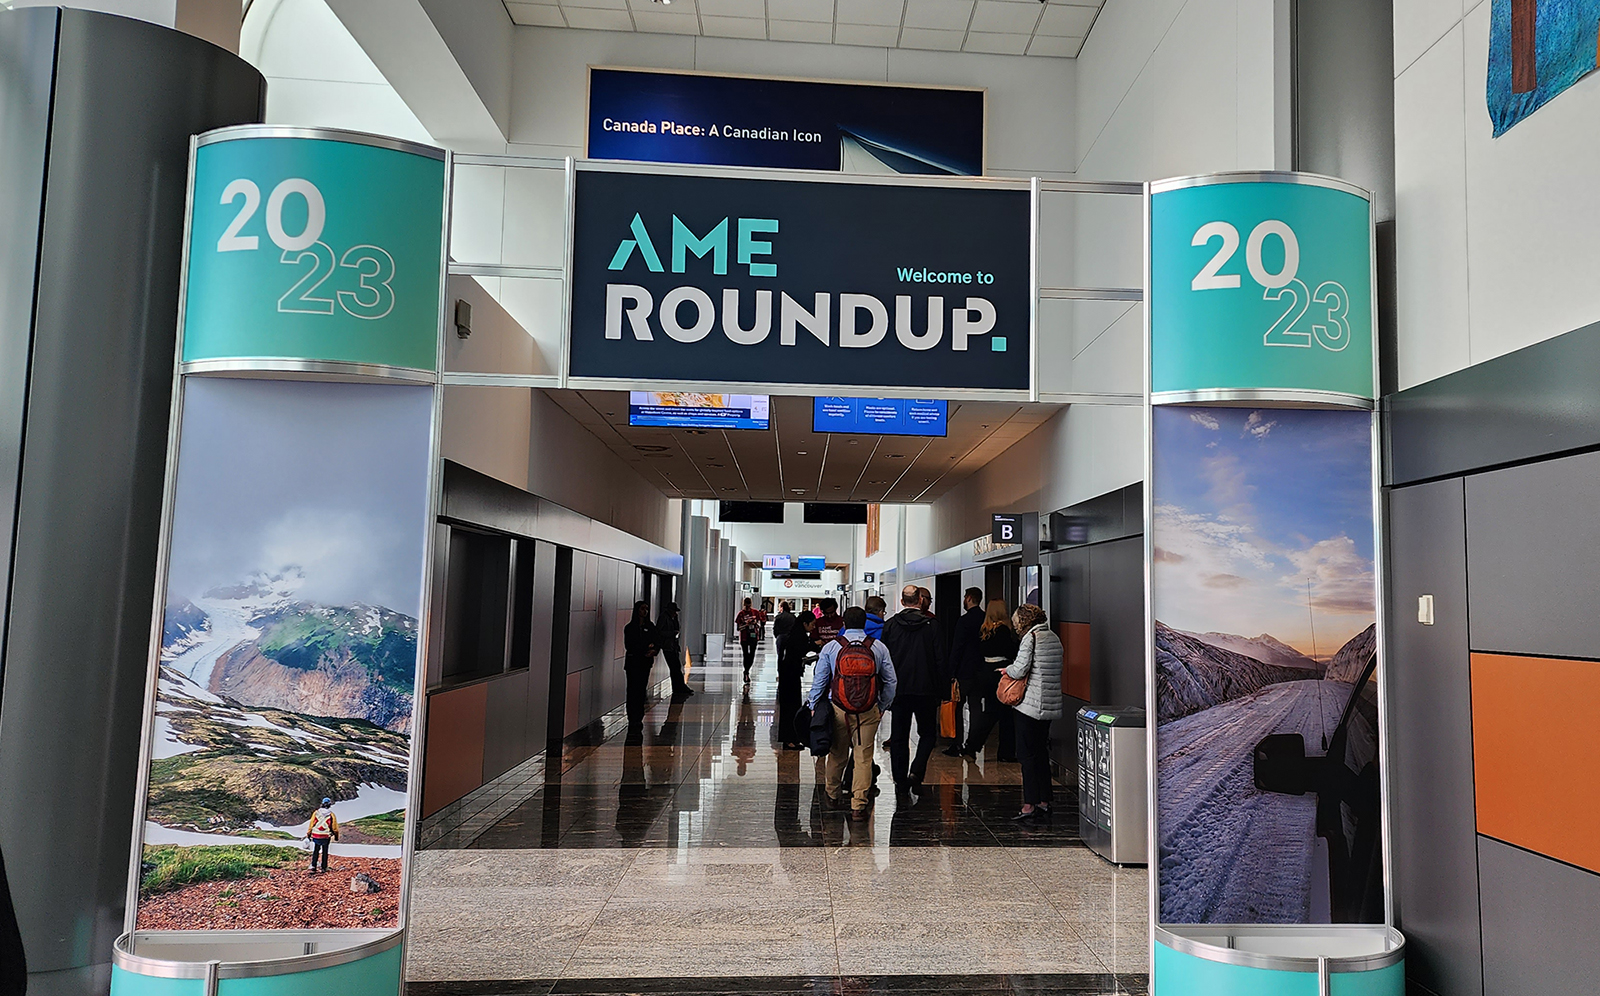 Entryway for the AME Roundup mineral exploration conference in Vancouver Canada.